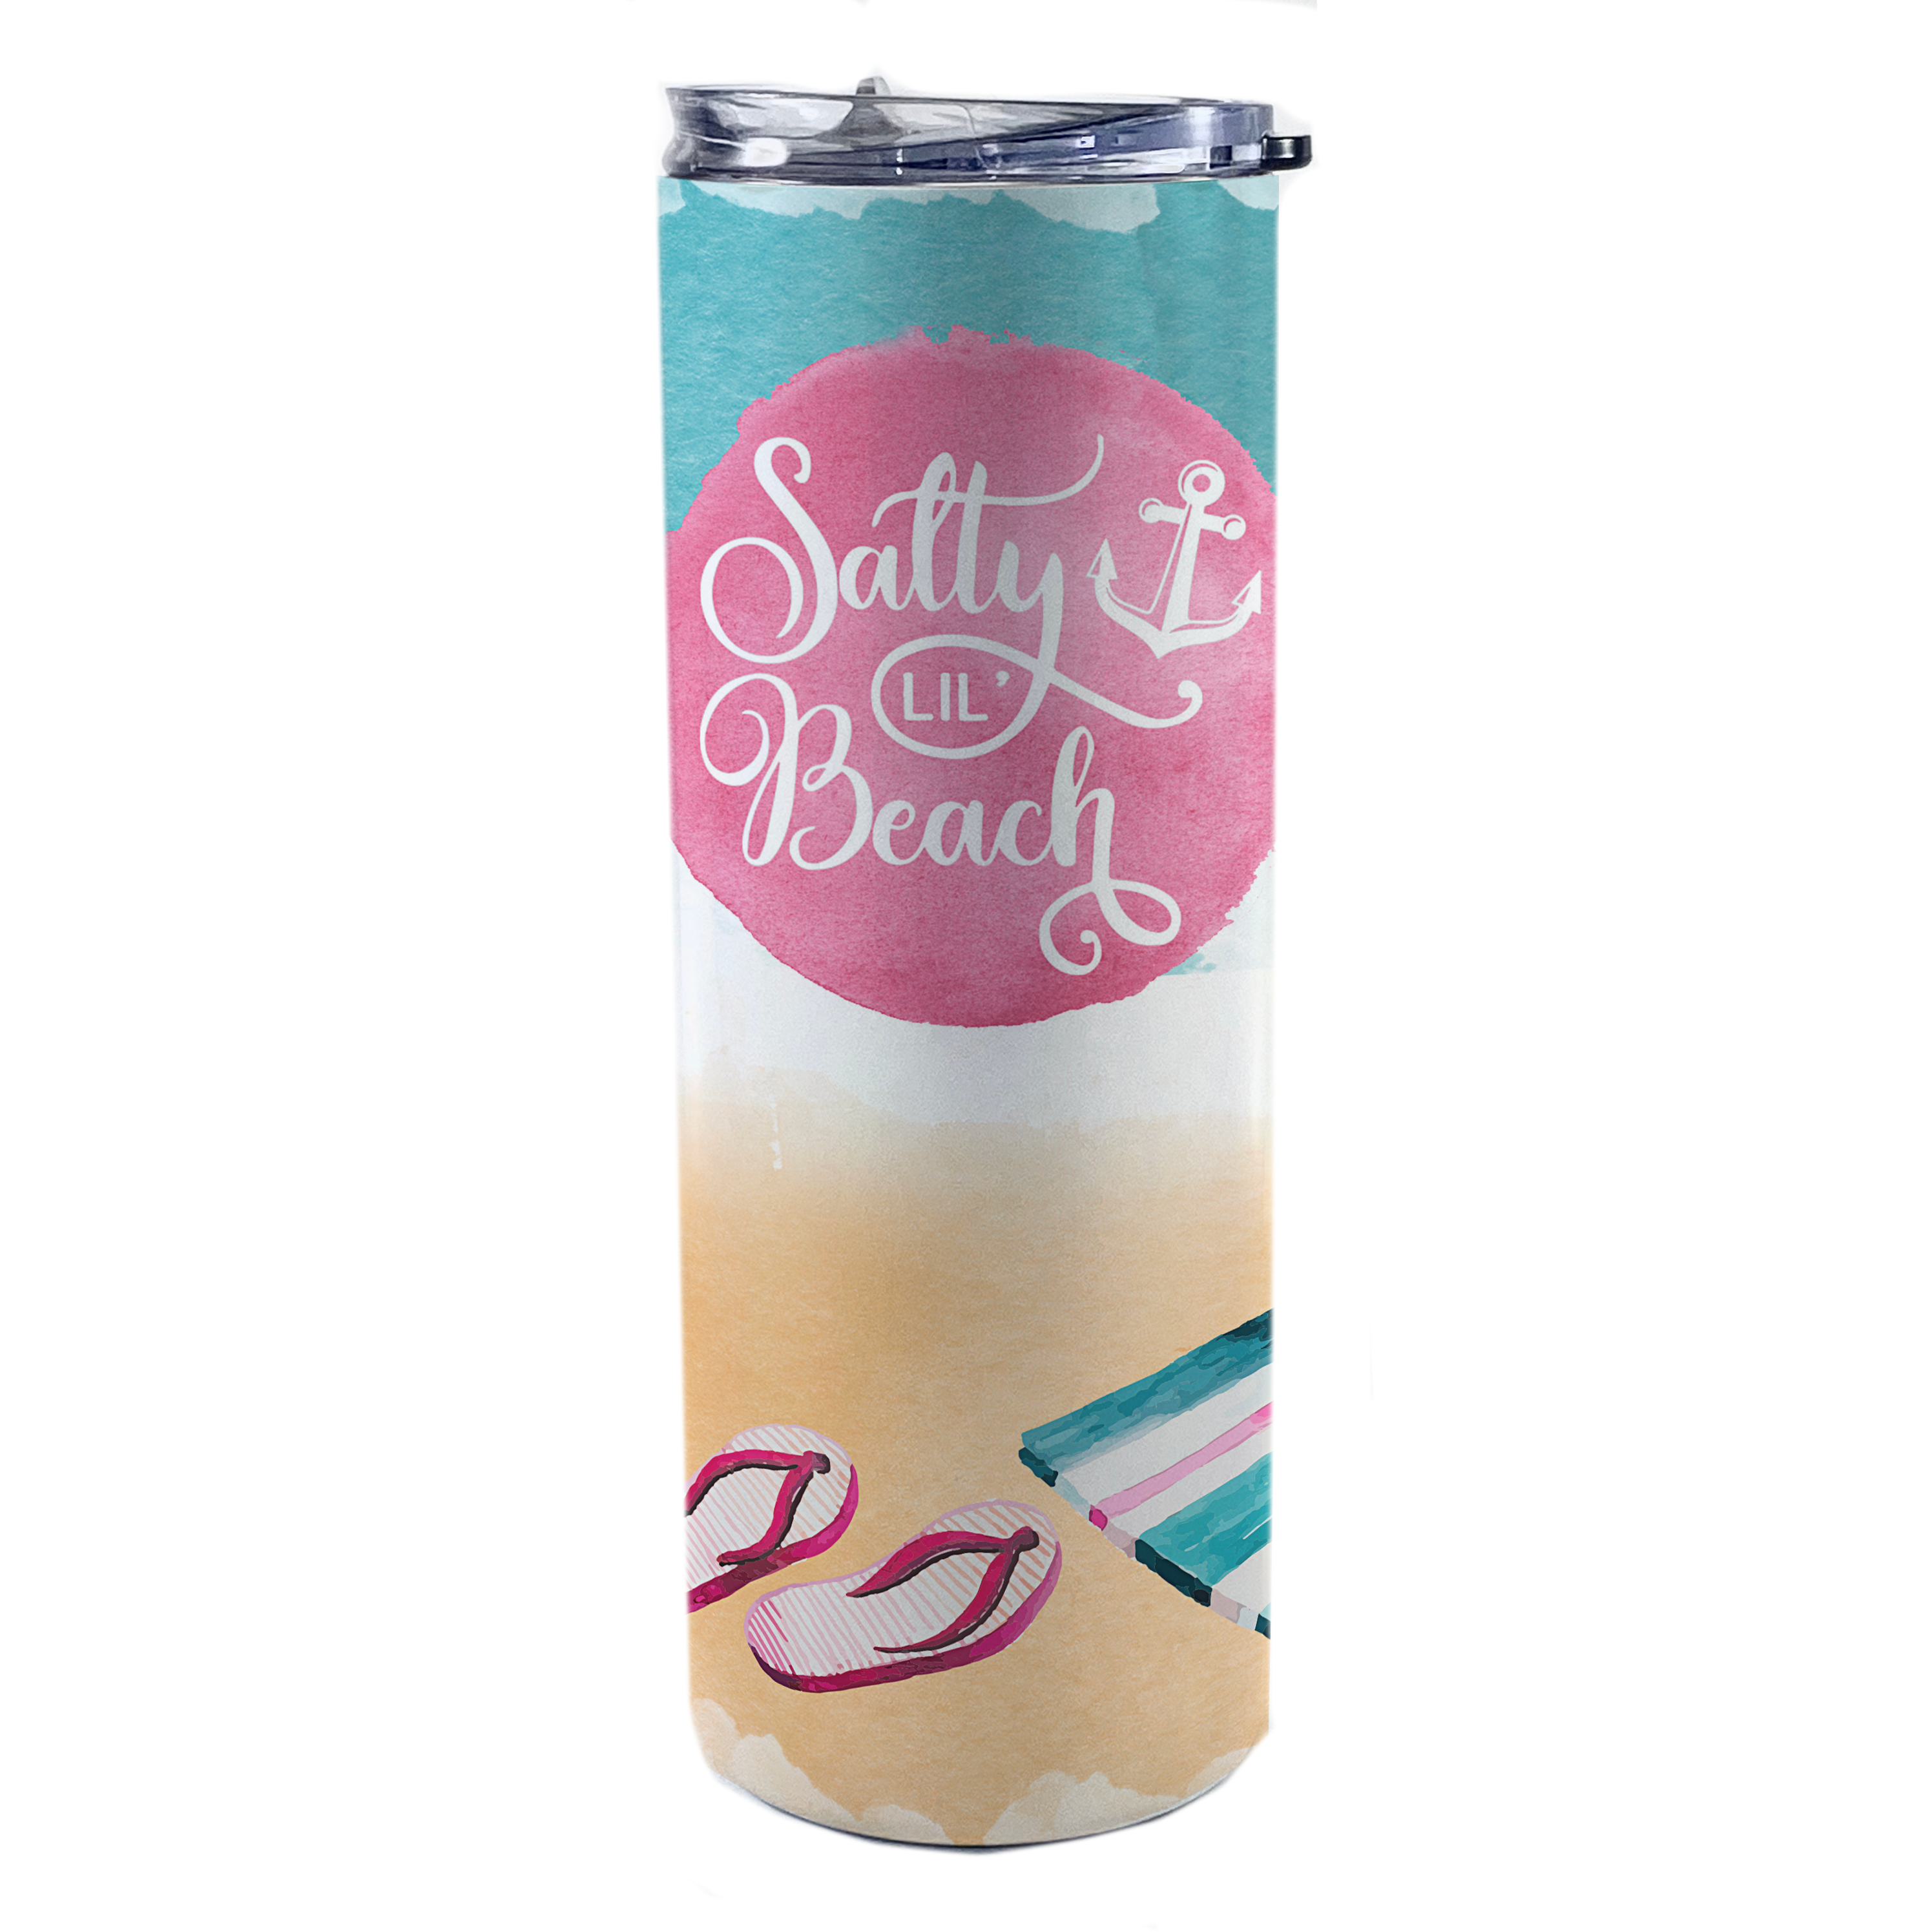 Vacation Collection (Salty Lil Beach) 20 Oz Stainless Steel Travel Tumbler with Straw SSTUMW0089